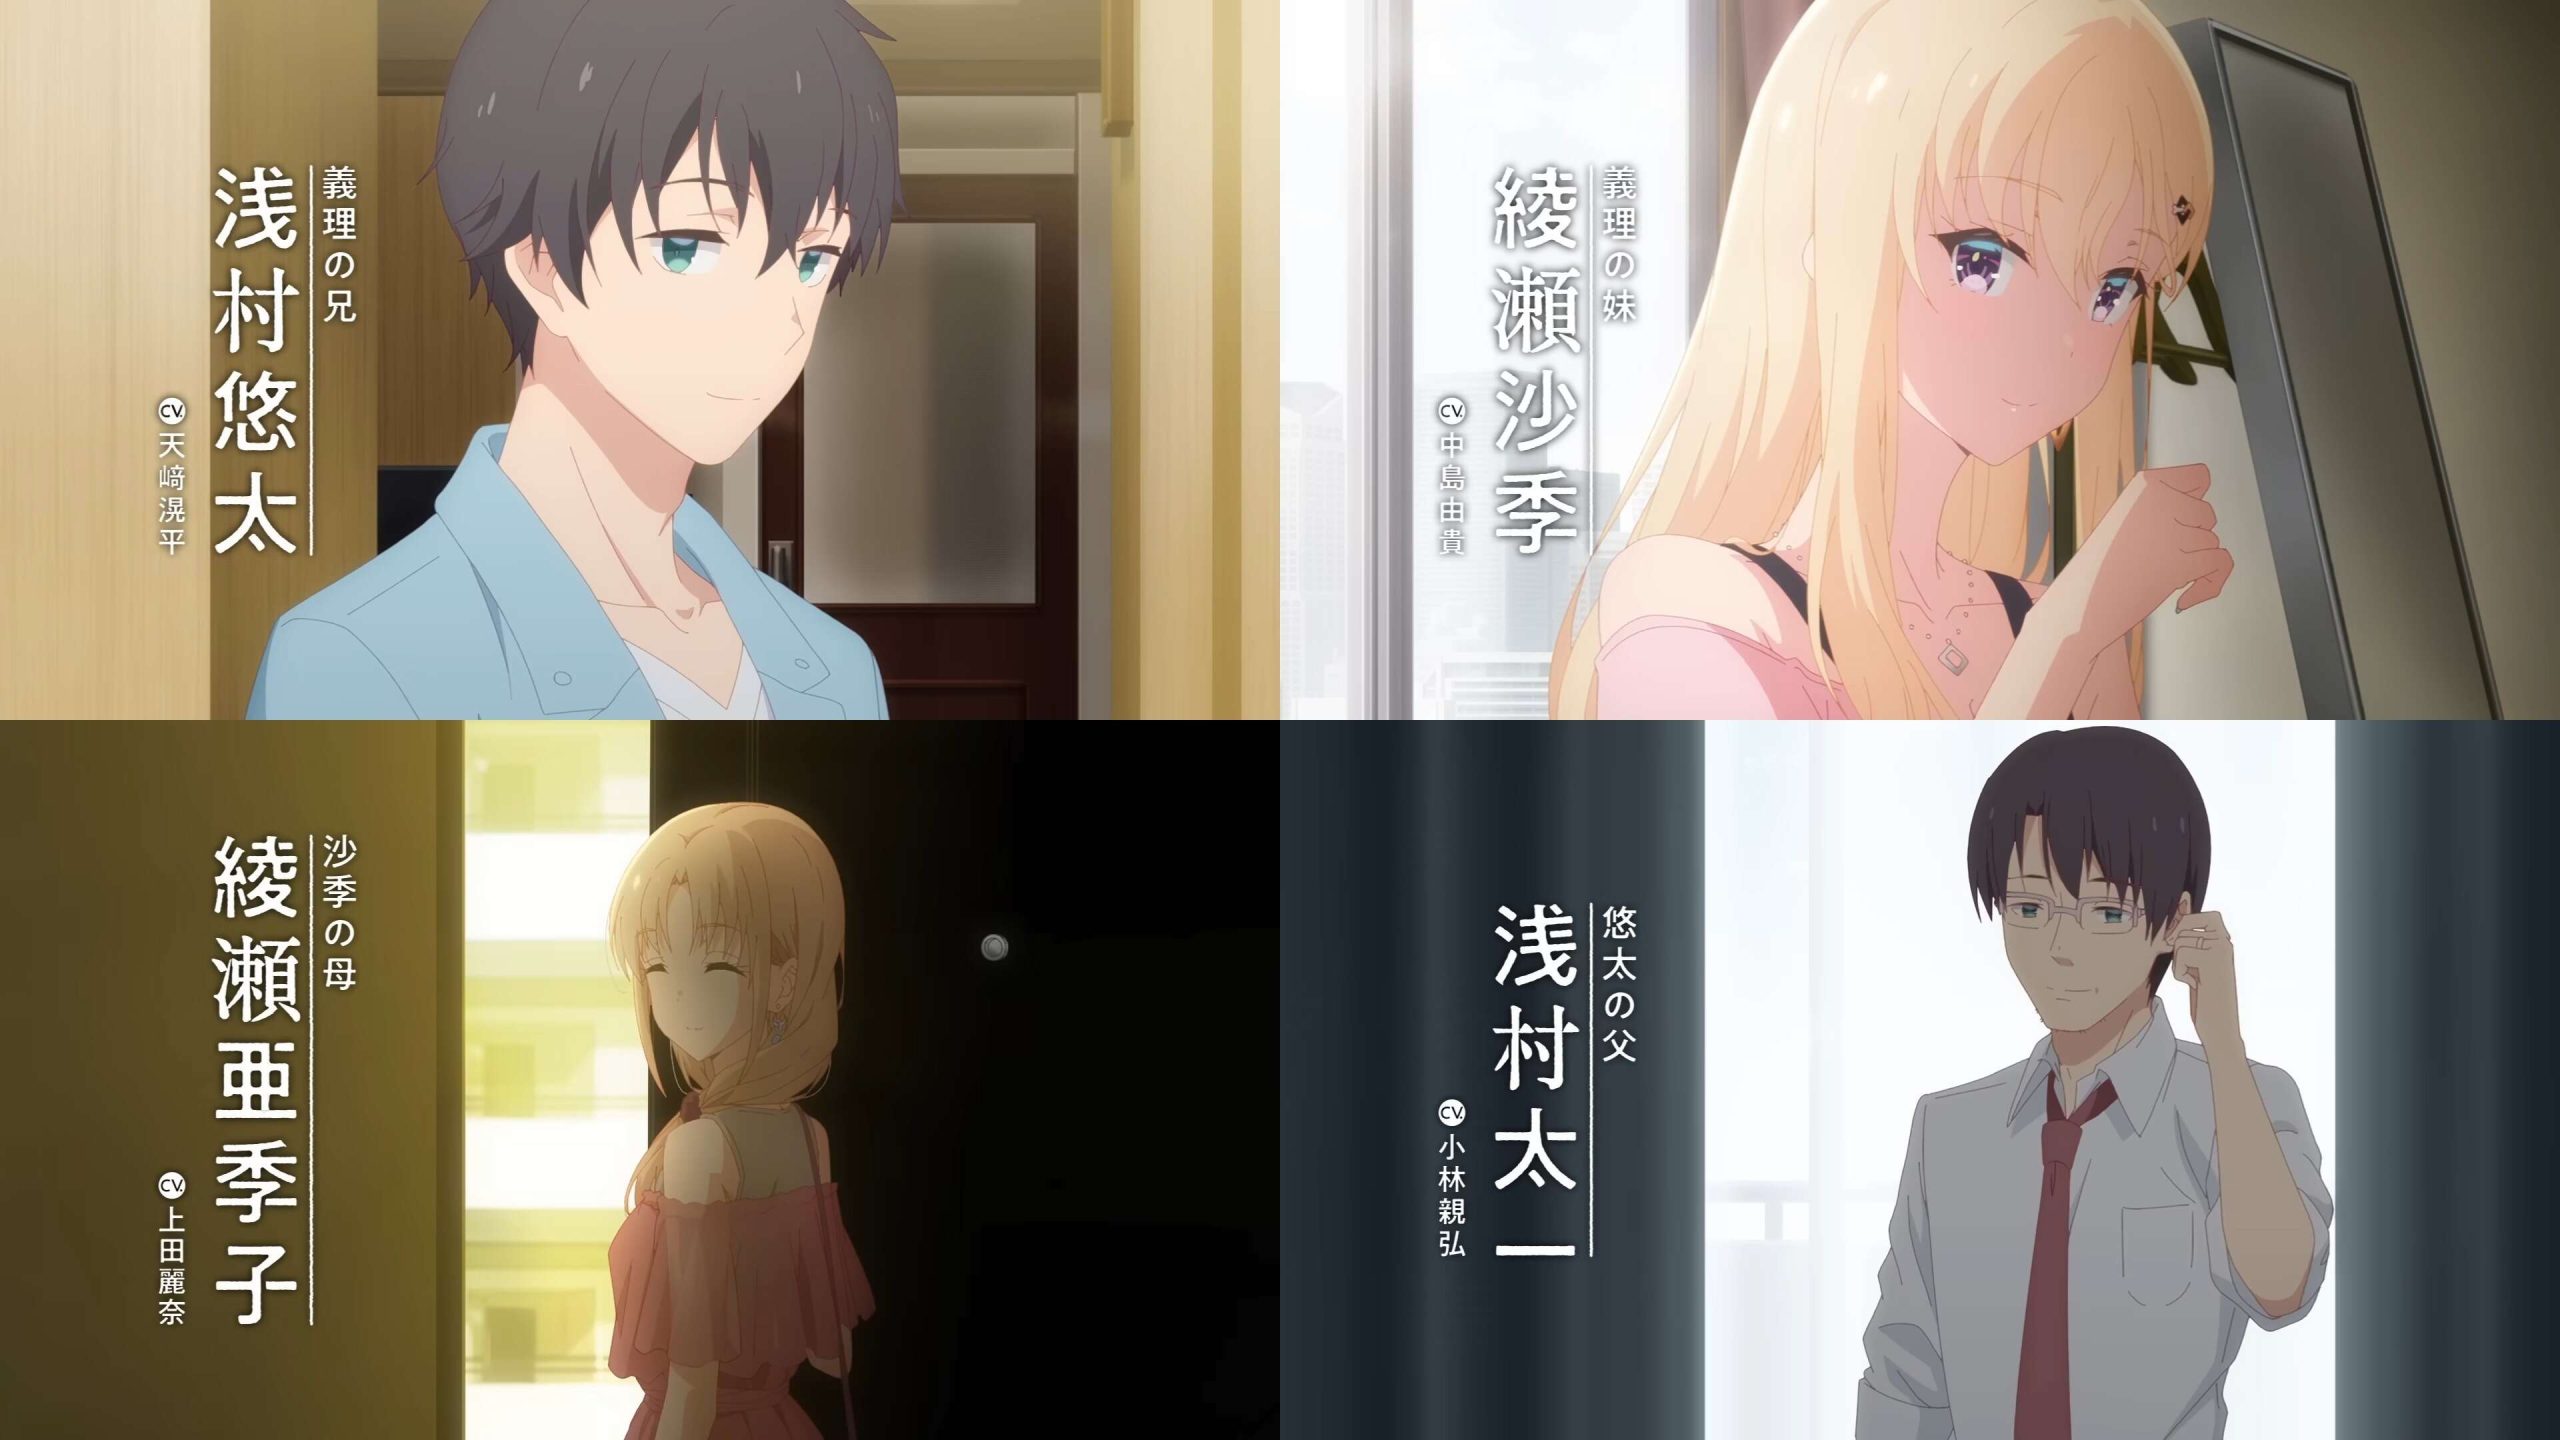 The Main And Supporting Characters In Days With My Stepsister - Yuuta Asamura, Saki Ayase, Akiko Ayase, And Taichi Asamura Respectively (Studio Deen)